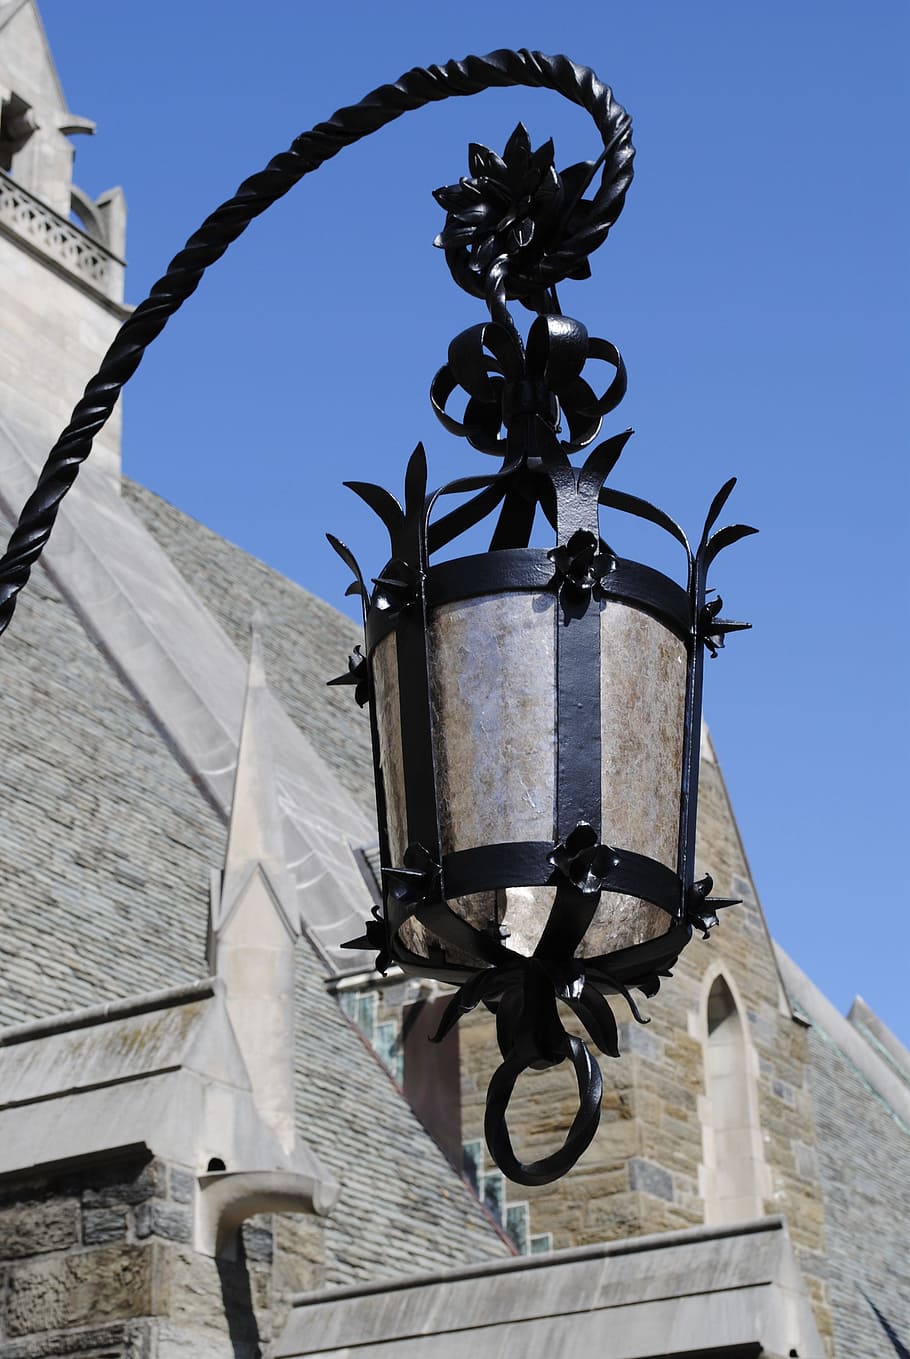 bryn mawr, pennsylvania, bryn mawr college, college campus, women's college, buildings, architecture, goodheart theater, lamp, architectural detail